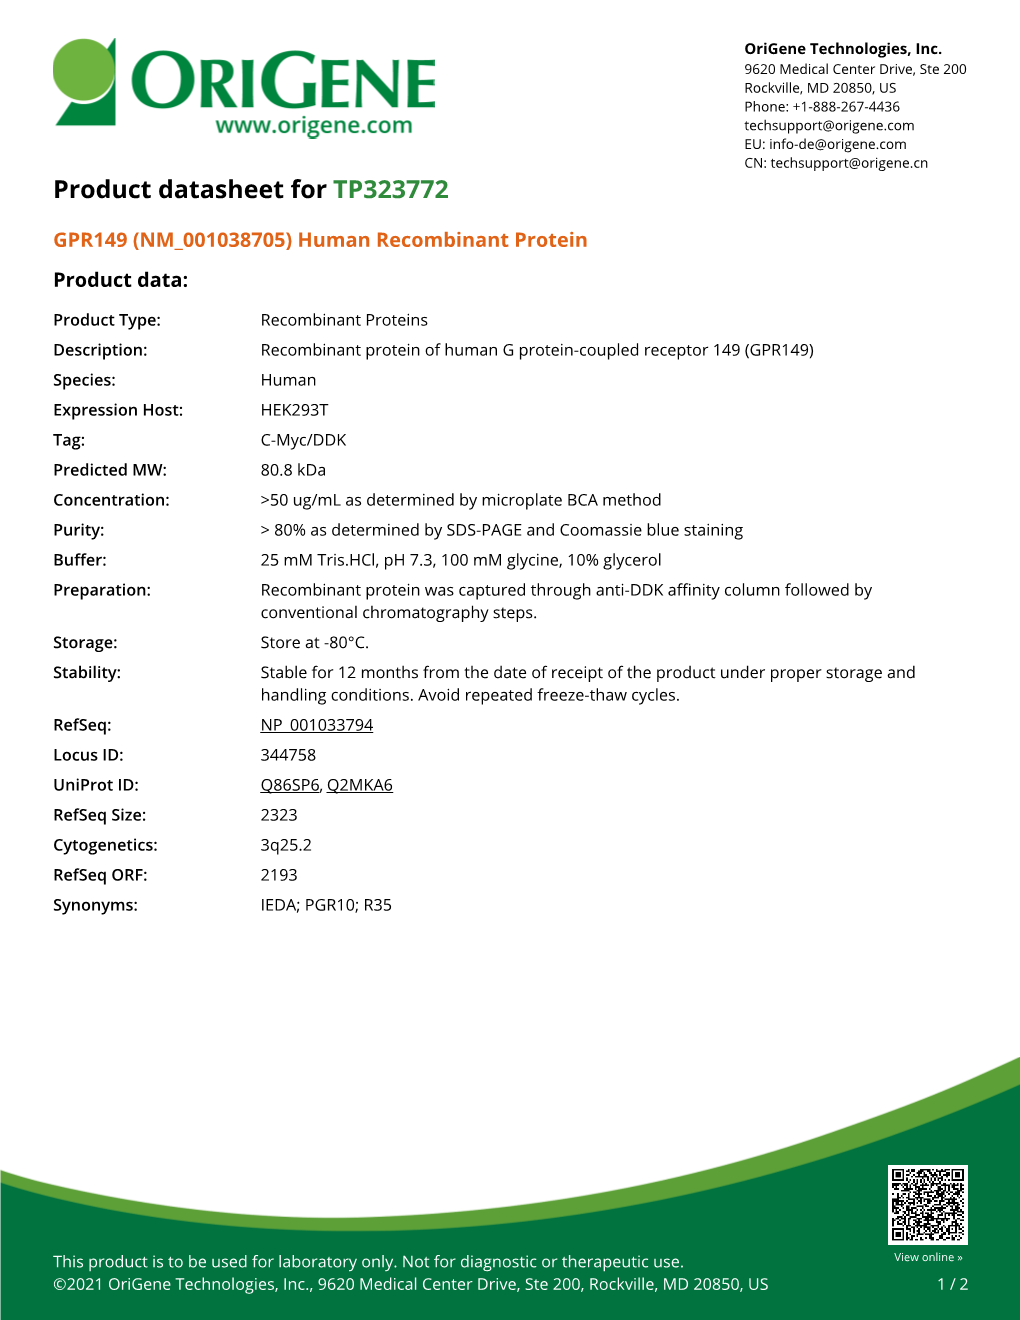 GPR149 (NM 001038705) Human Recombinant Protein – TP323772